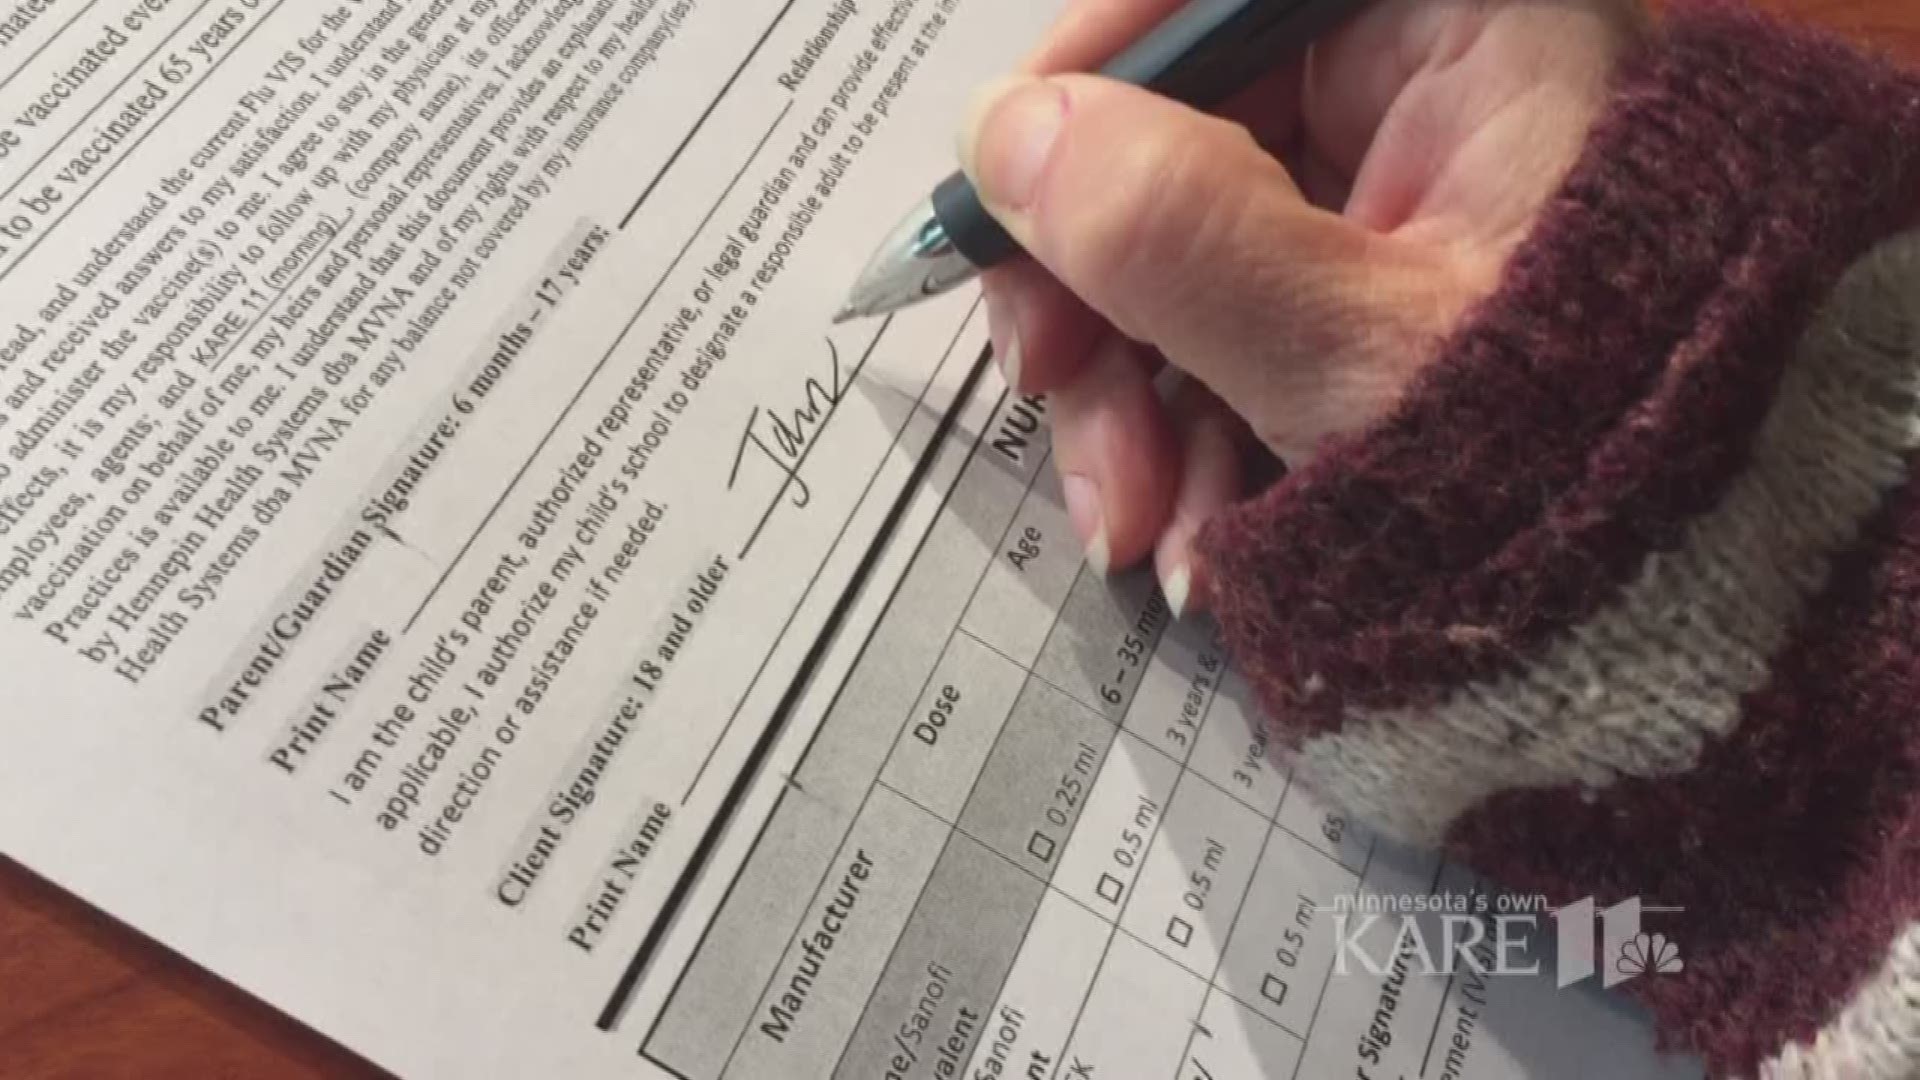 A viewer wanted to know, if children are not being taught cursive, what happens when they need to write their name for legal documents - say mortgage papers, wills, drivers licenses or passports? And, what constitutes a legal signature? http://kare11.tv/2